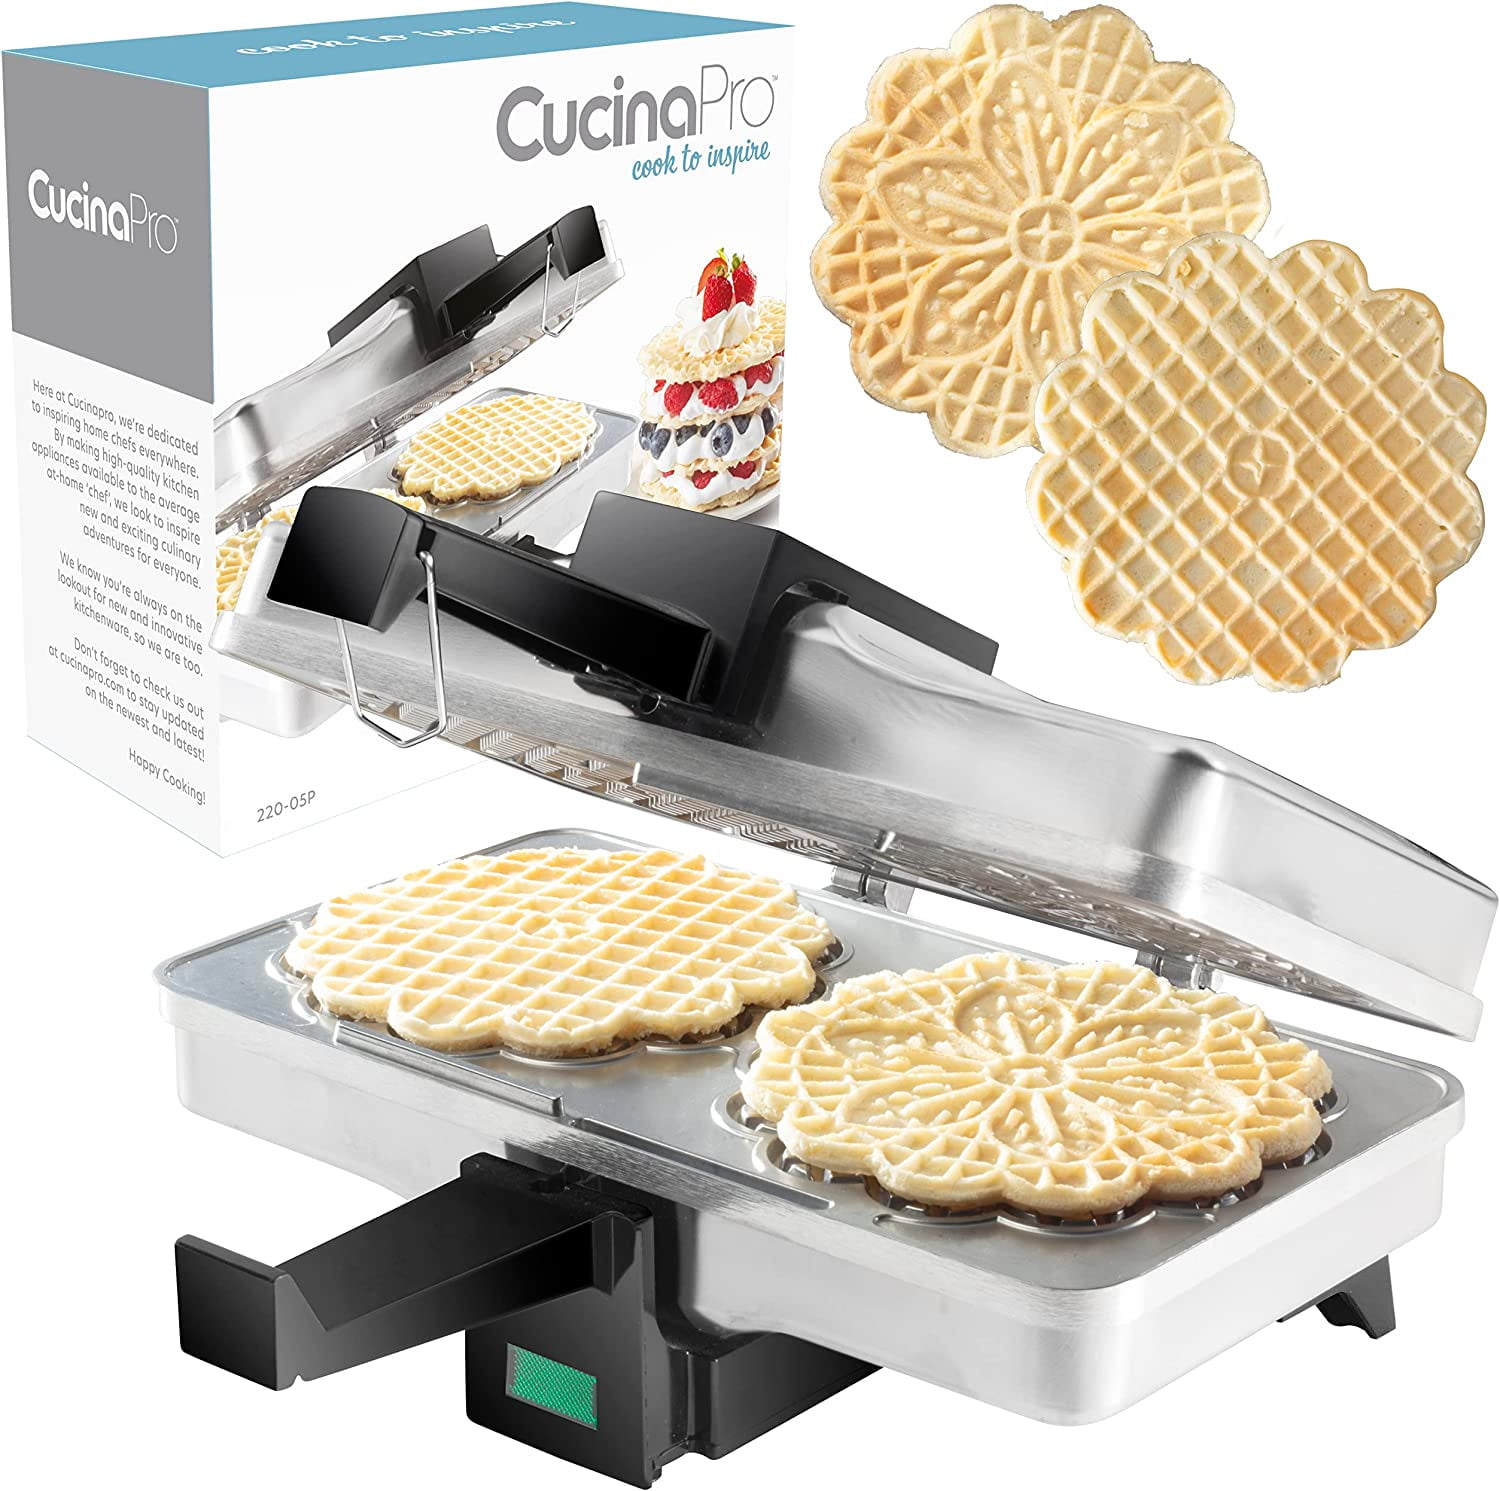 4 waffle cookies with this Pizzelle Maker non-stick, electric